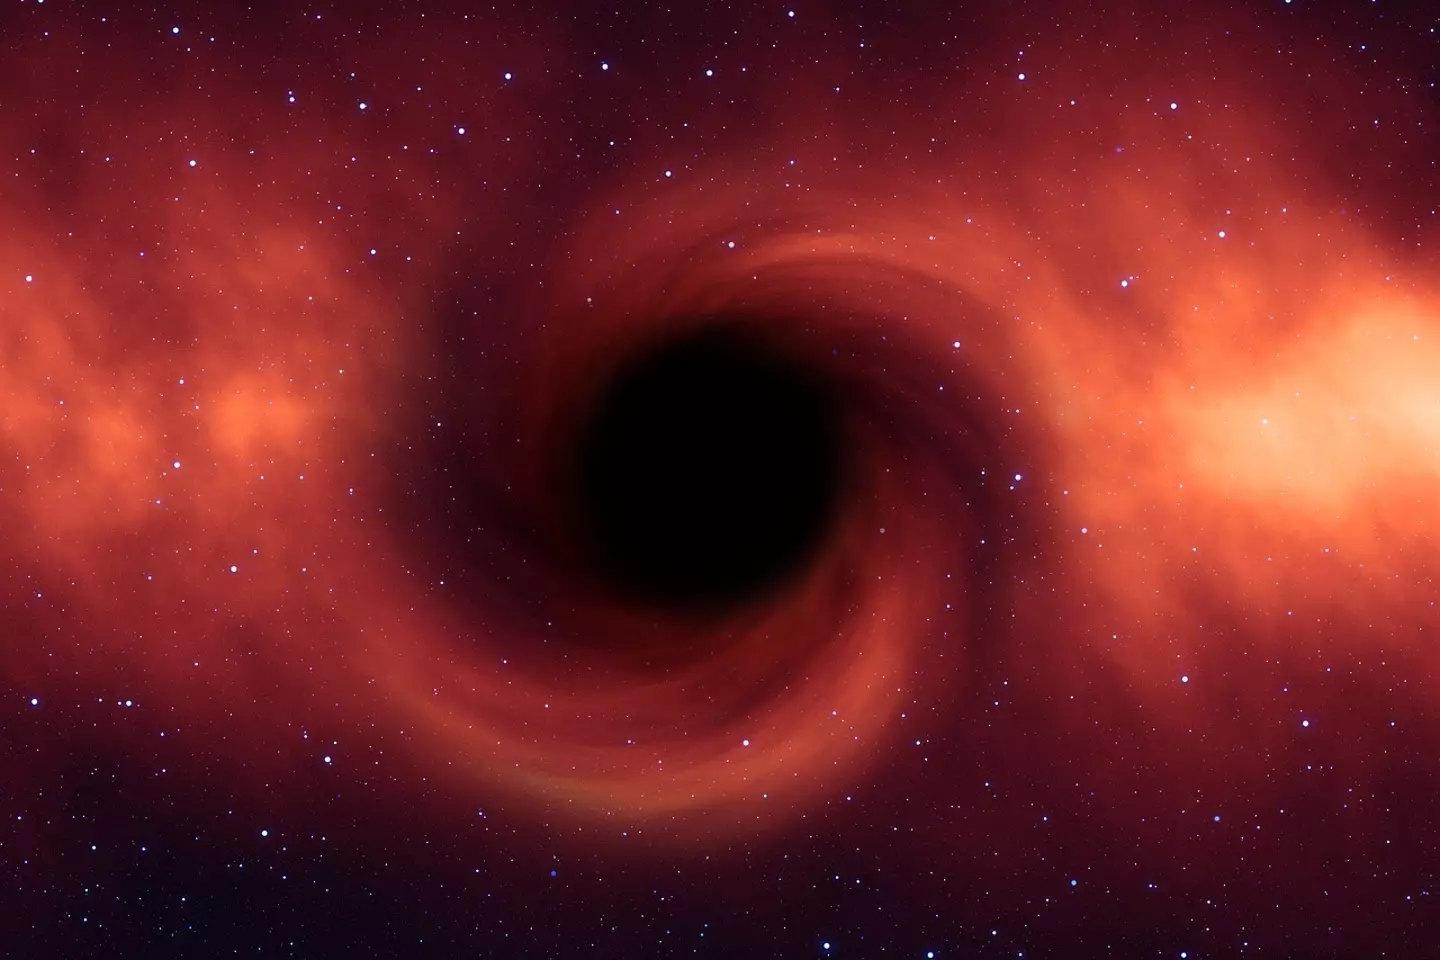 Turns out black holes aren't the only thing that can evaporate.